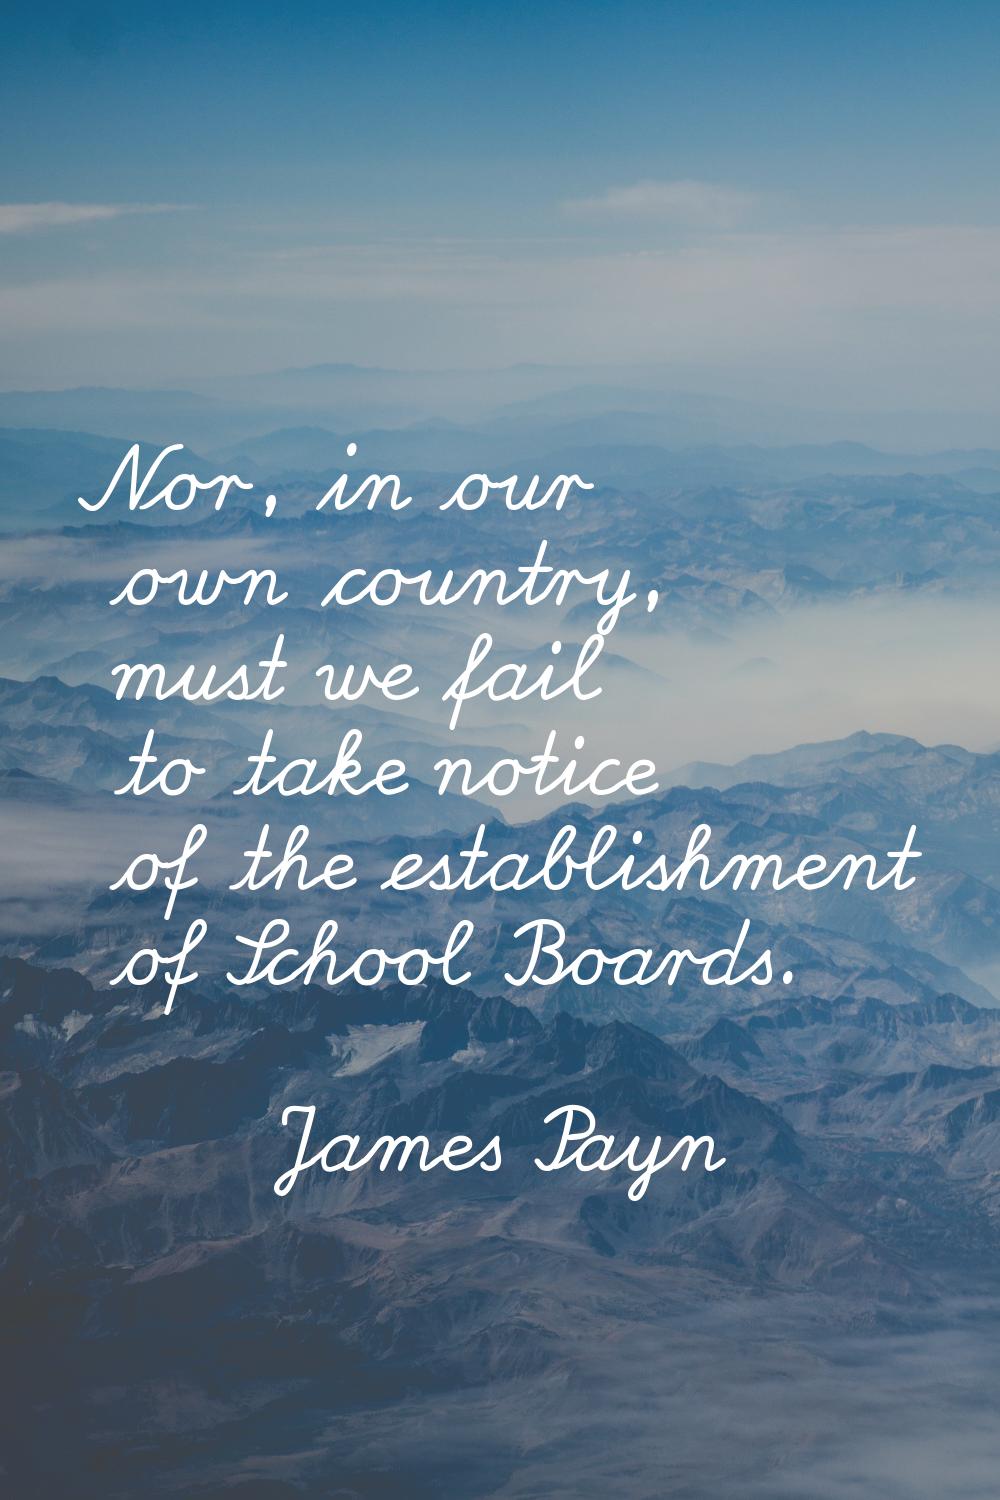 Nor, in our own country, must we fail to take notice of the establishment of School Boards.